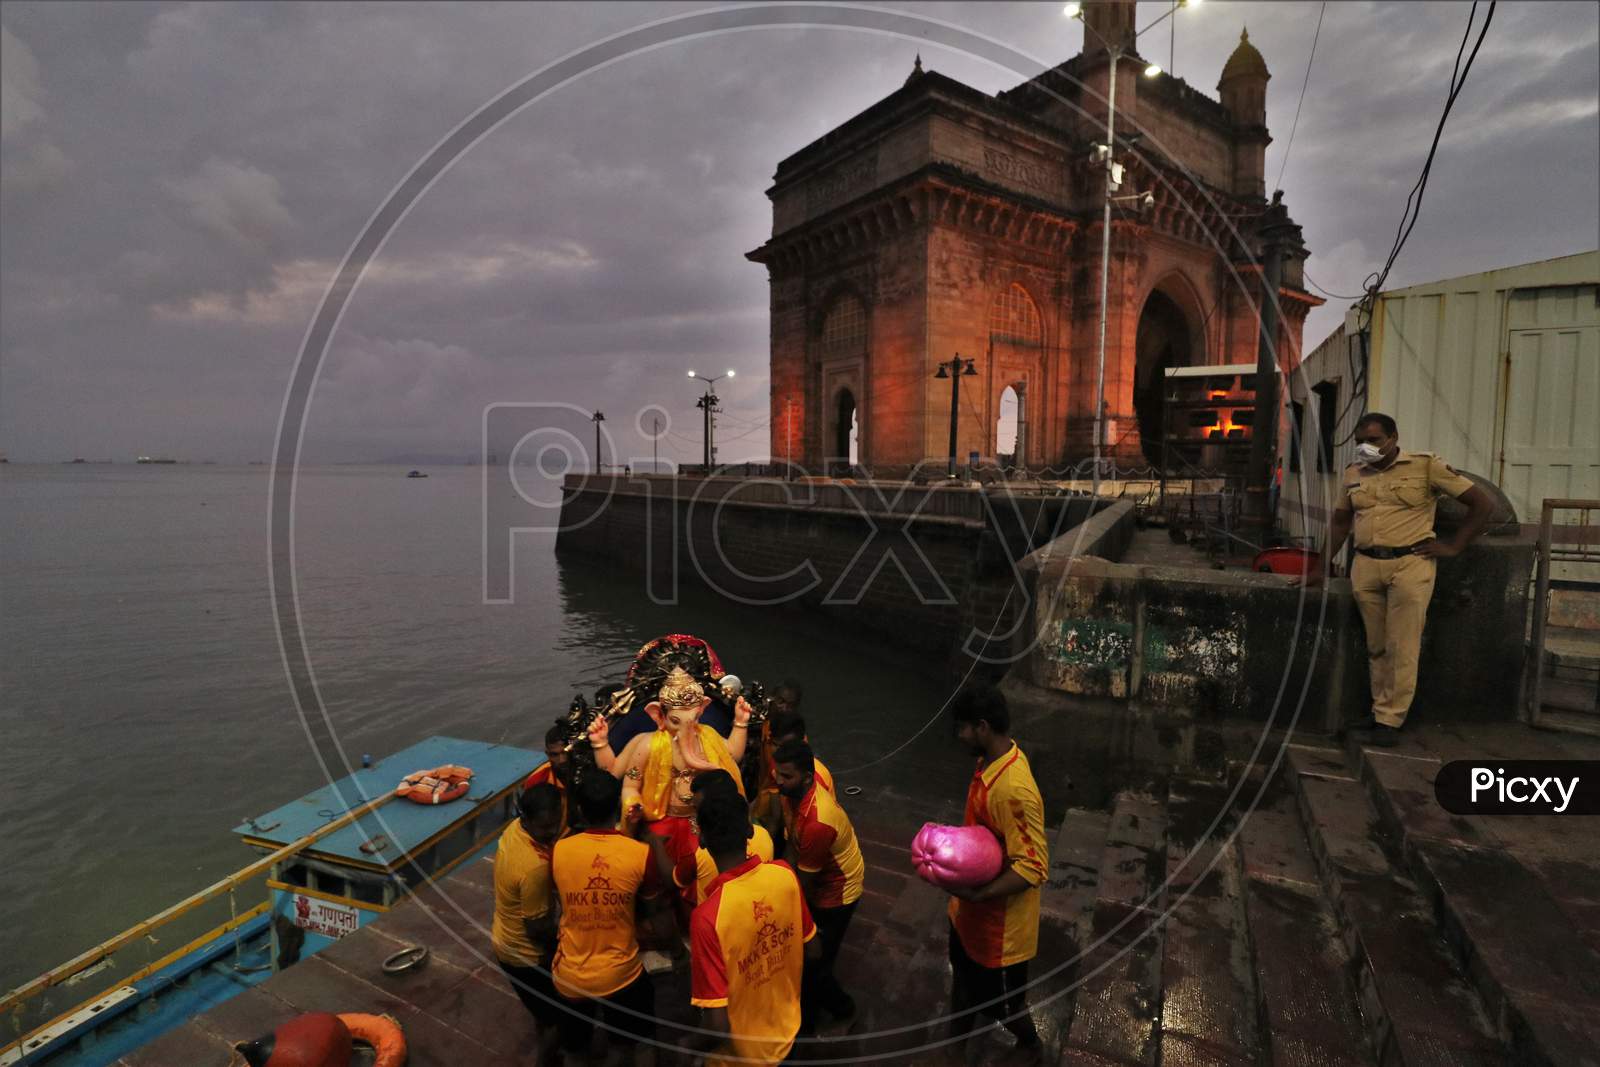 Volunteers carry an idol of Hindu God Ganesha, to immerse in the Arabian Sea, marking the end of the 10-day long Ganesh Chaturthi festival at the Gateway of India, in Mumbai, India on September 1, 2020